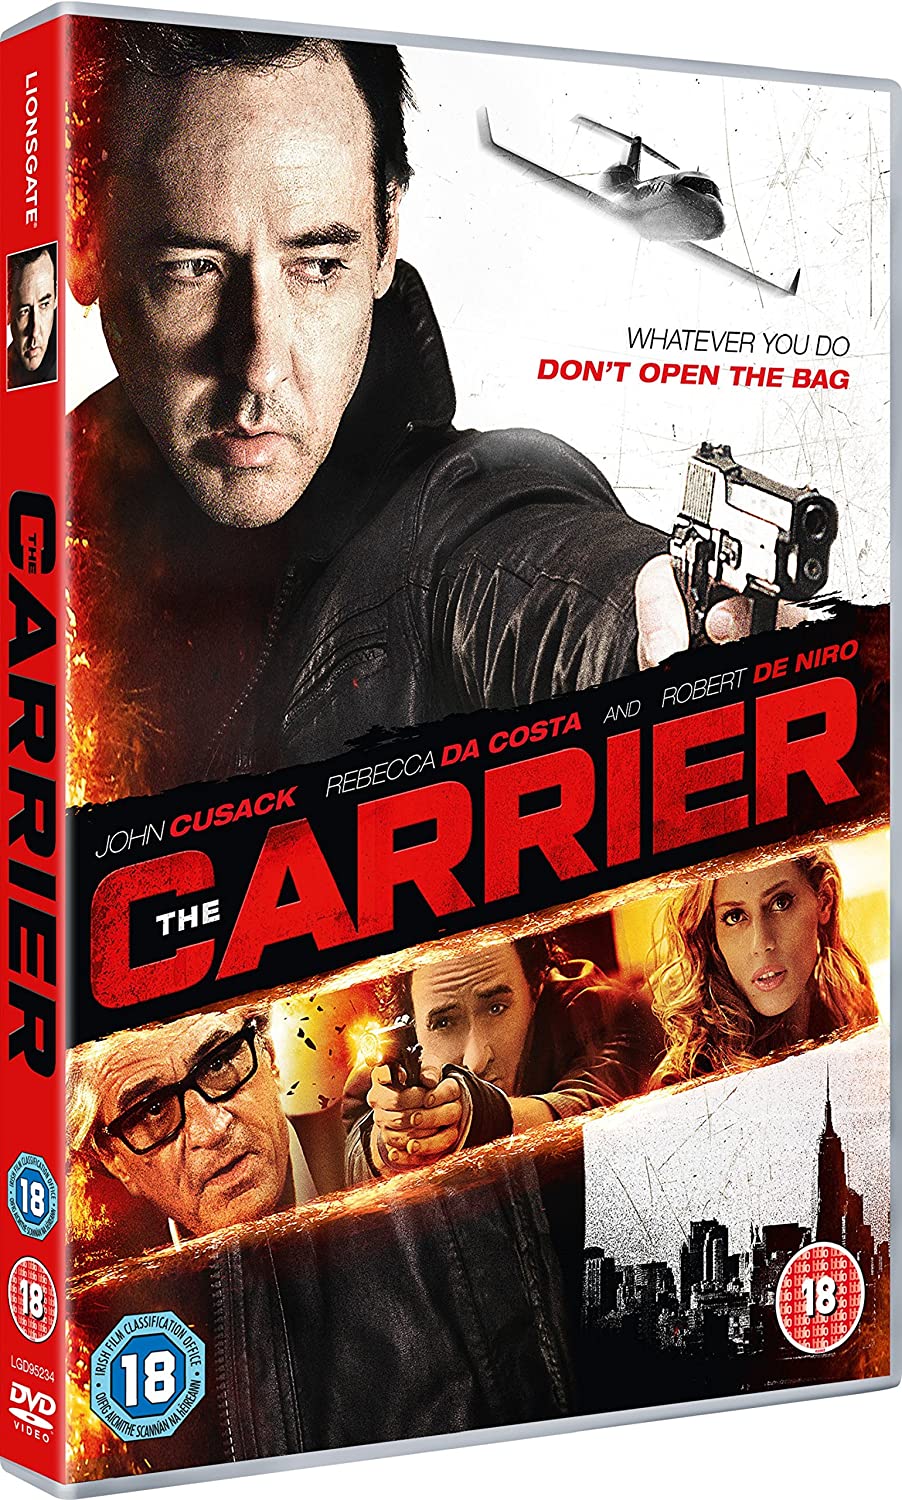 The Carrier [2017] -  Sci-fi/Drama [DVD]